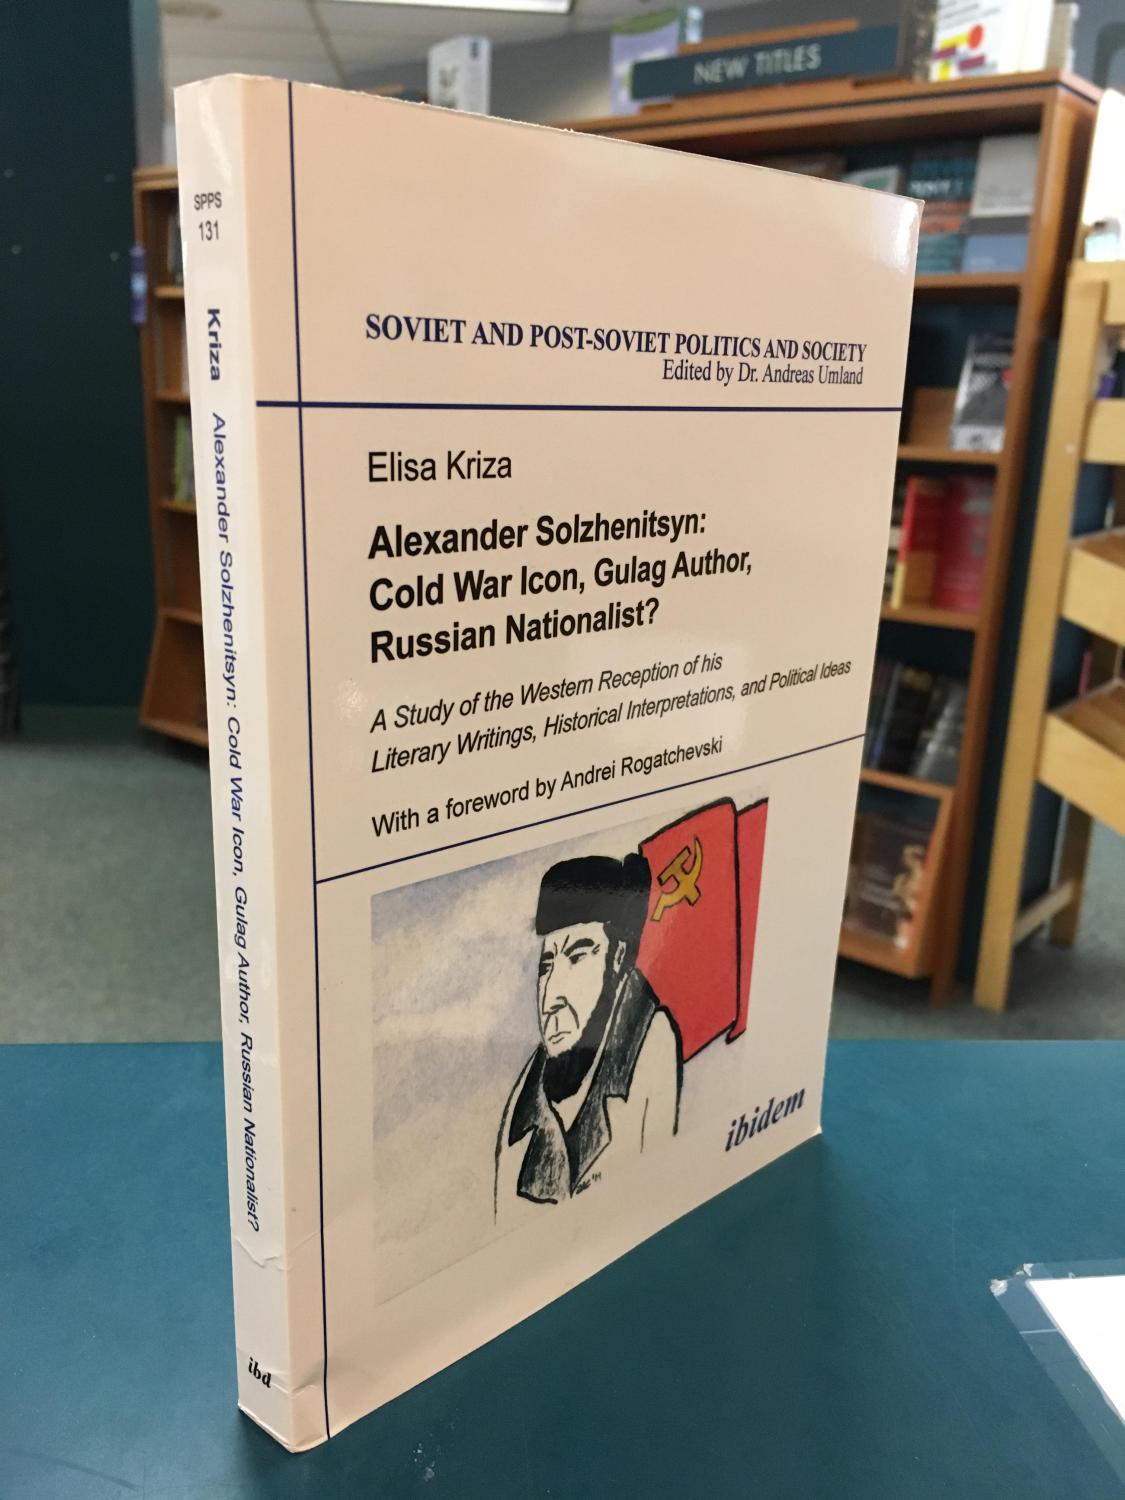 Alexander Solzhenitsyn: Cold War Icon, Gulag Author, Russian Nationalist?: A Study of His Western Reception (Soviet and Post-Soviet Politics and Society) - Elisa Kriza